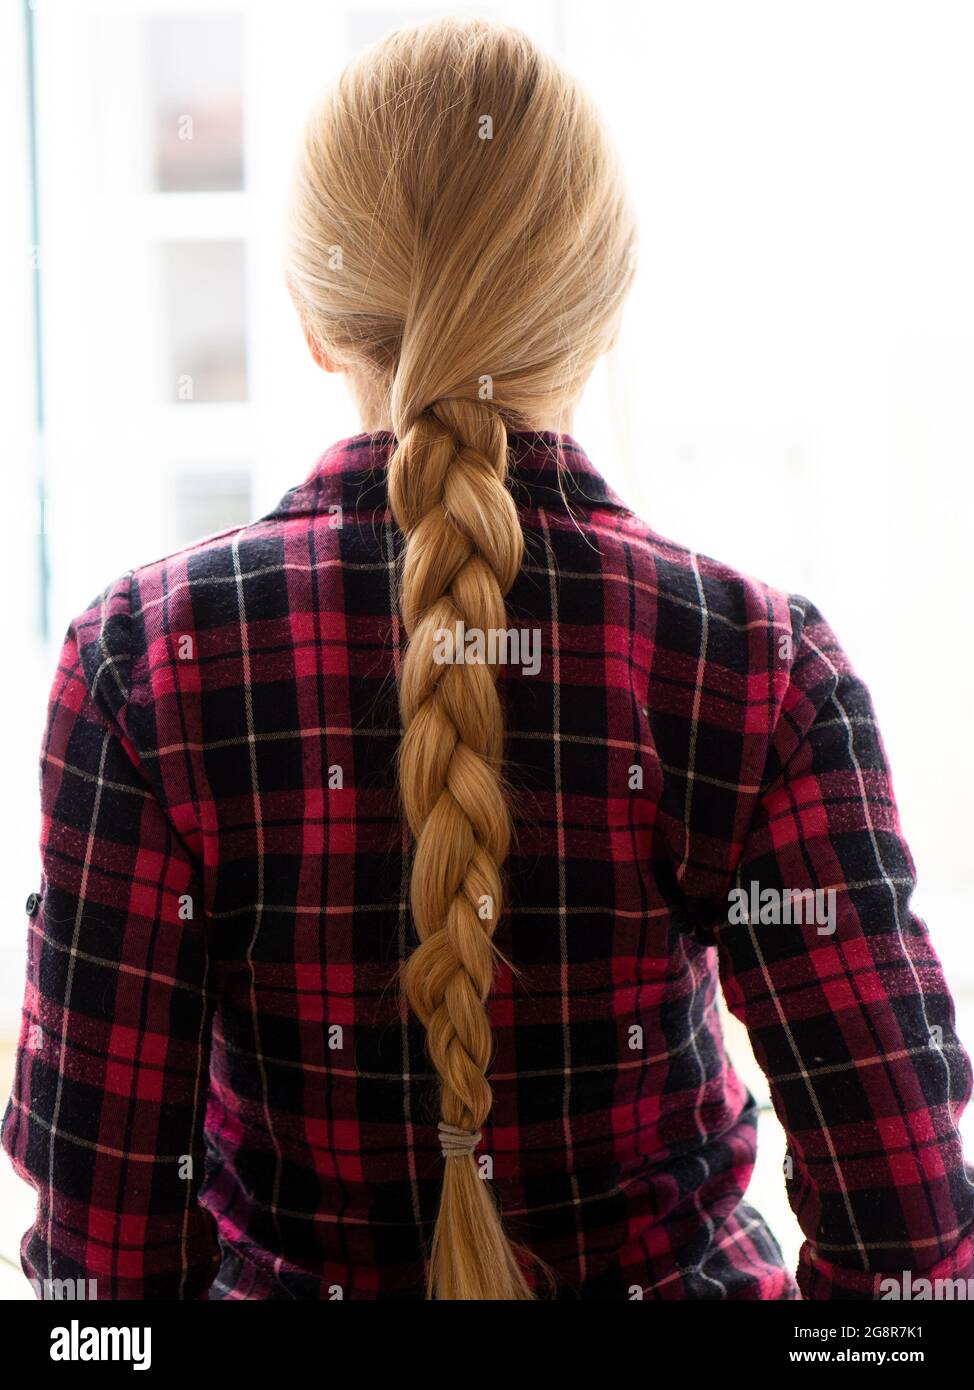 Woman with a braid wearing flanner shirt Stock Photo